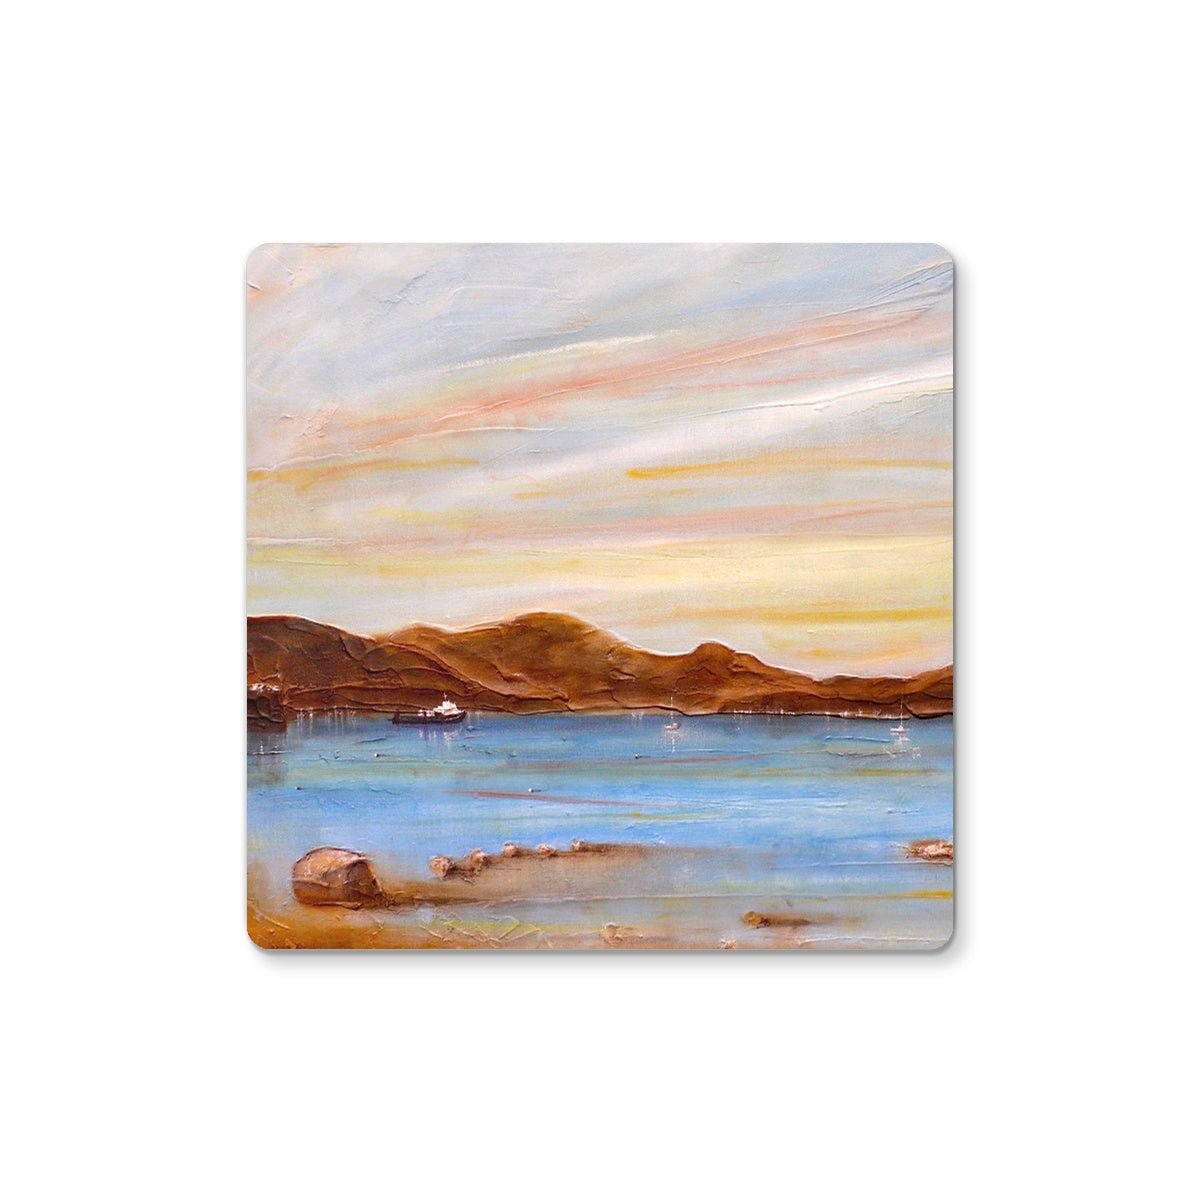 The Last Ferry To Dunoon Art Gifts Coaster-Coasters-River Clyde Art Gallery-2 Coasters-Paintings, Prints, Homeware, Art Gifts From Scotland By Scottish Artist Kevin Hunter